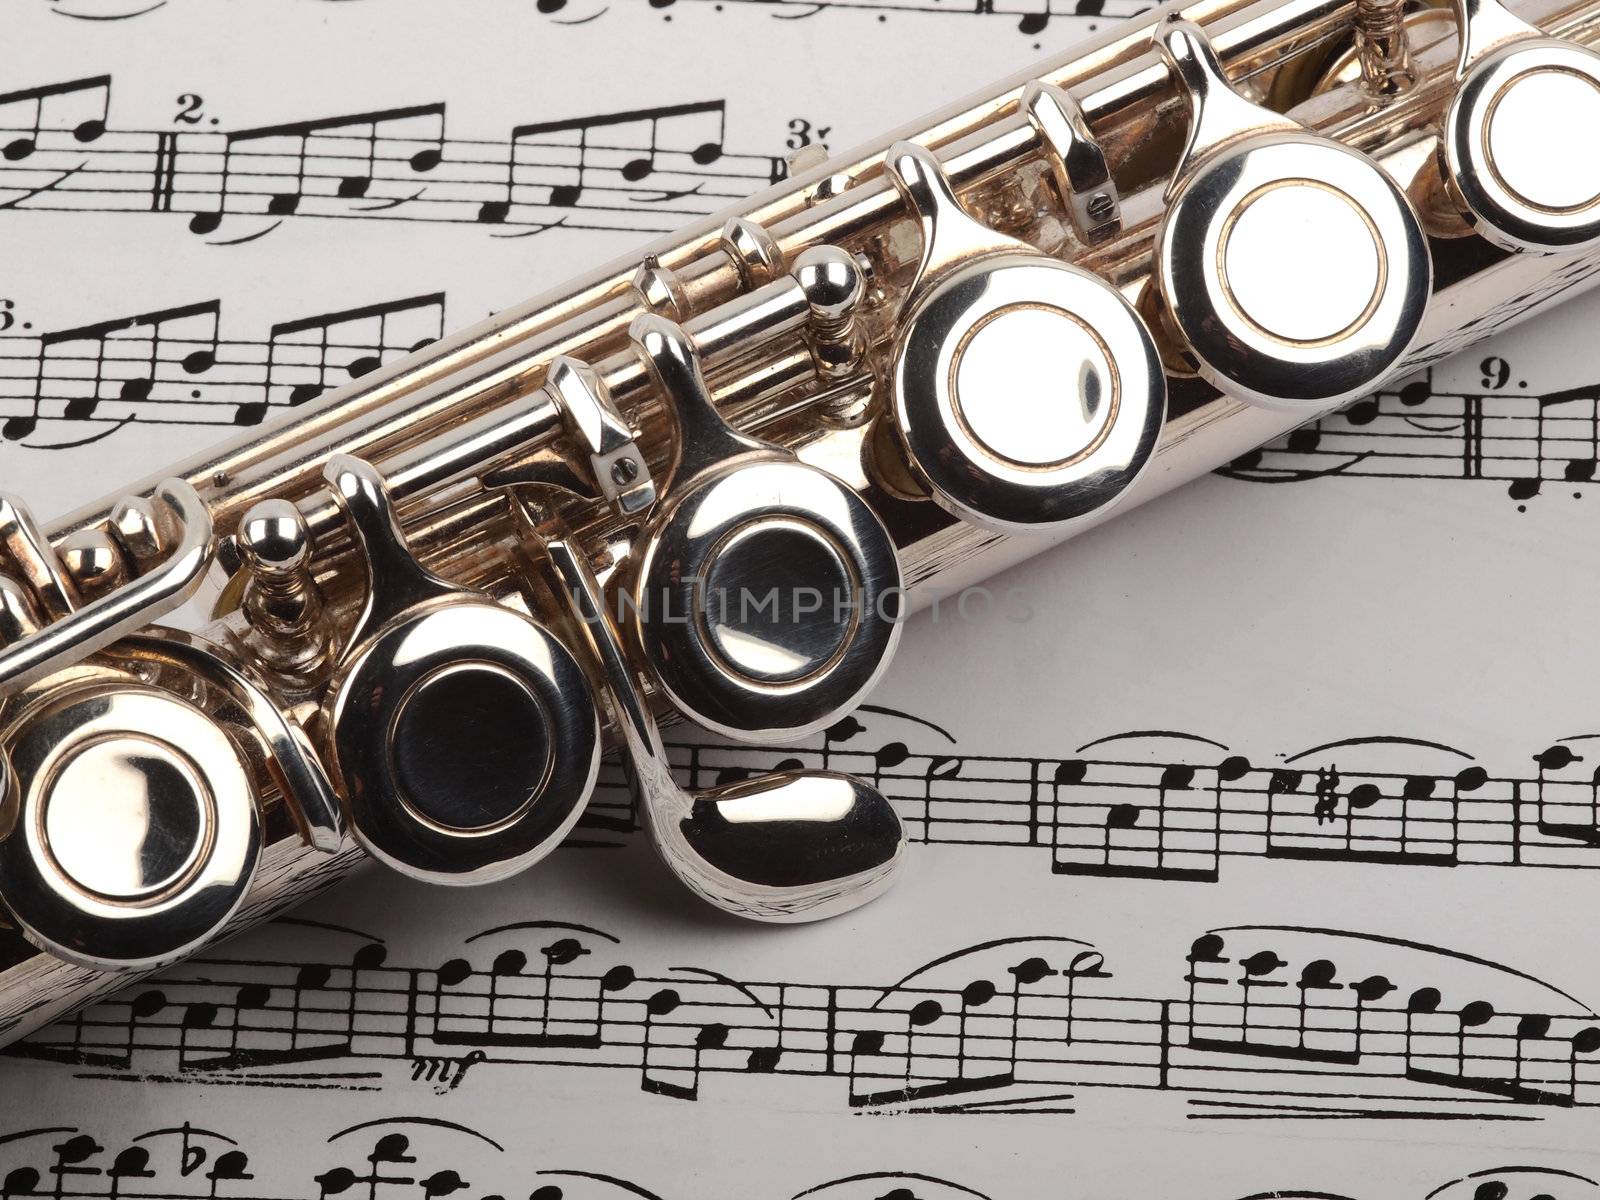 
A used flute rests across an open musical score. Only one line of music is in focus.